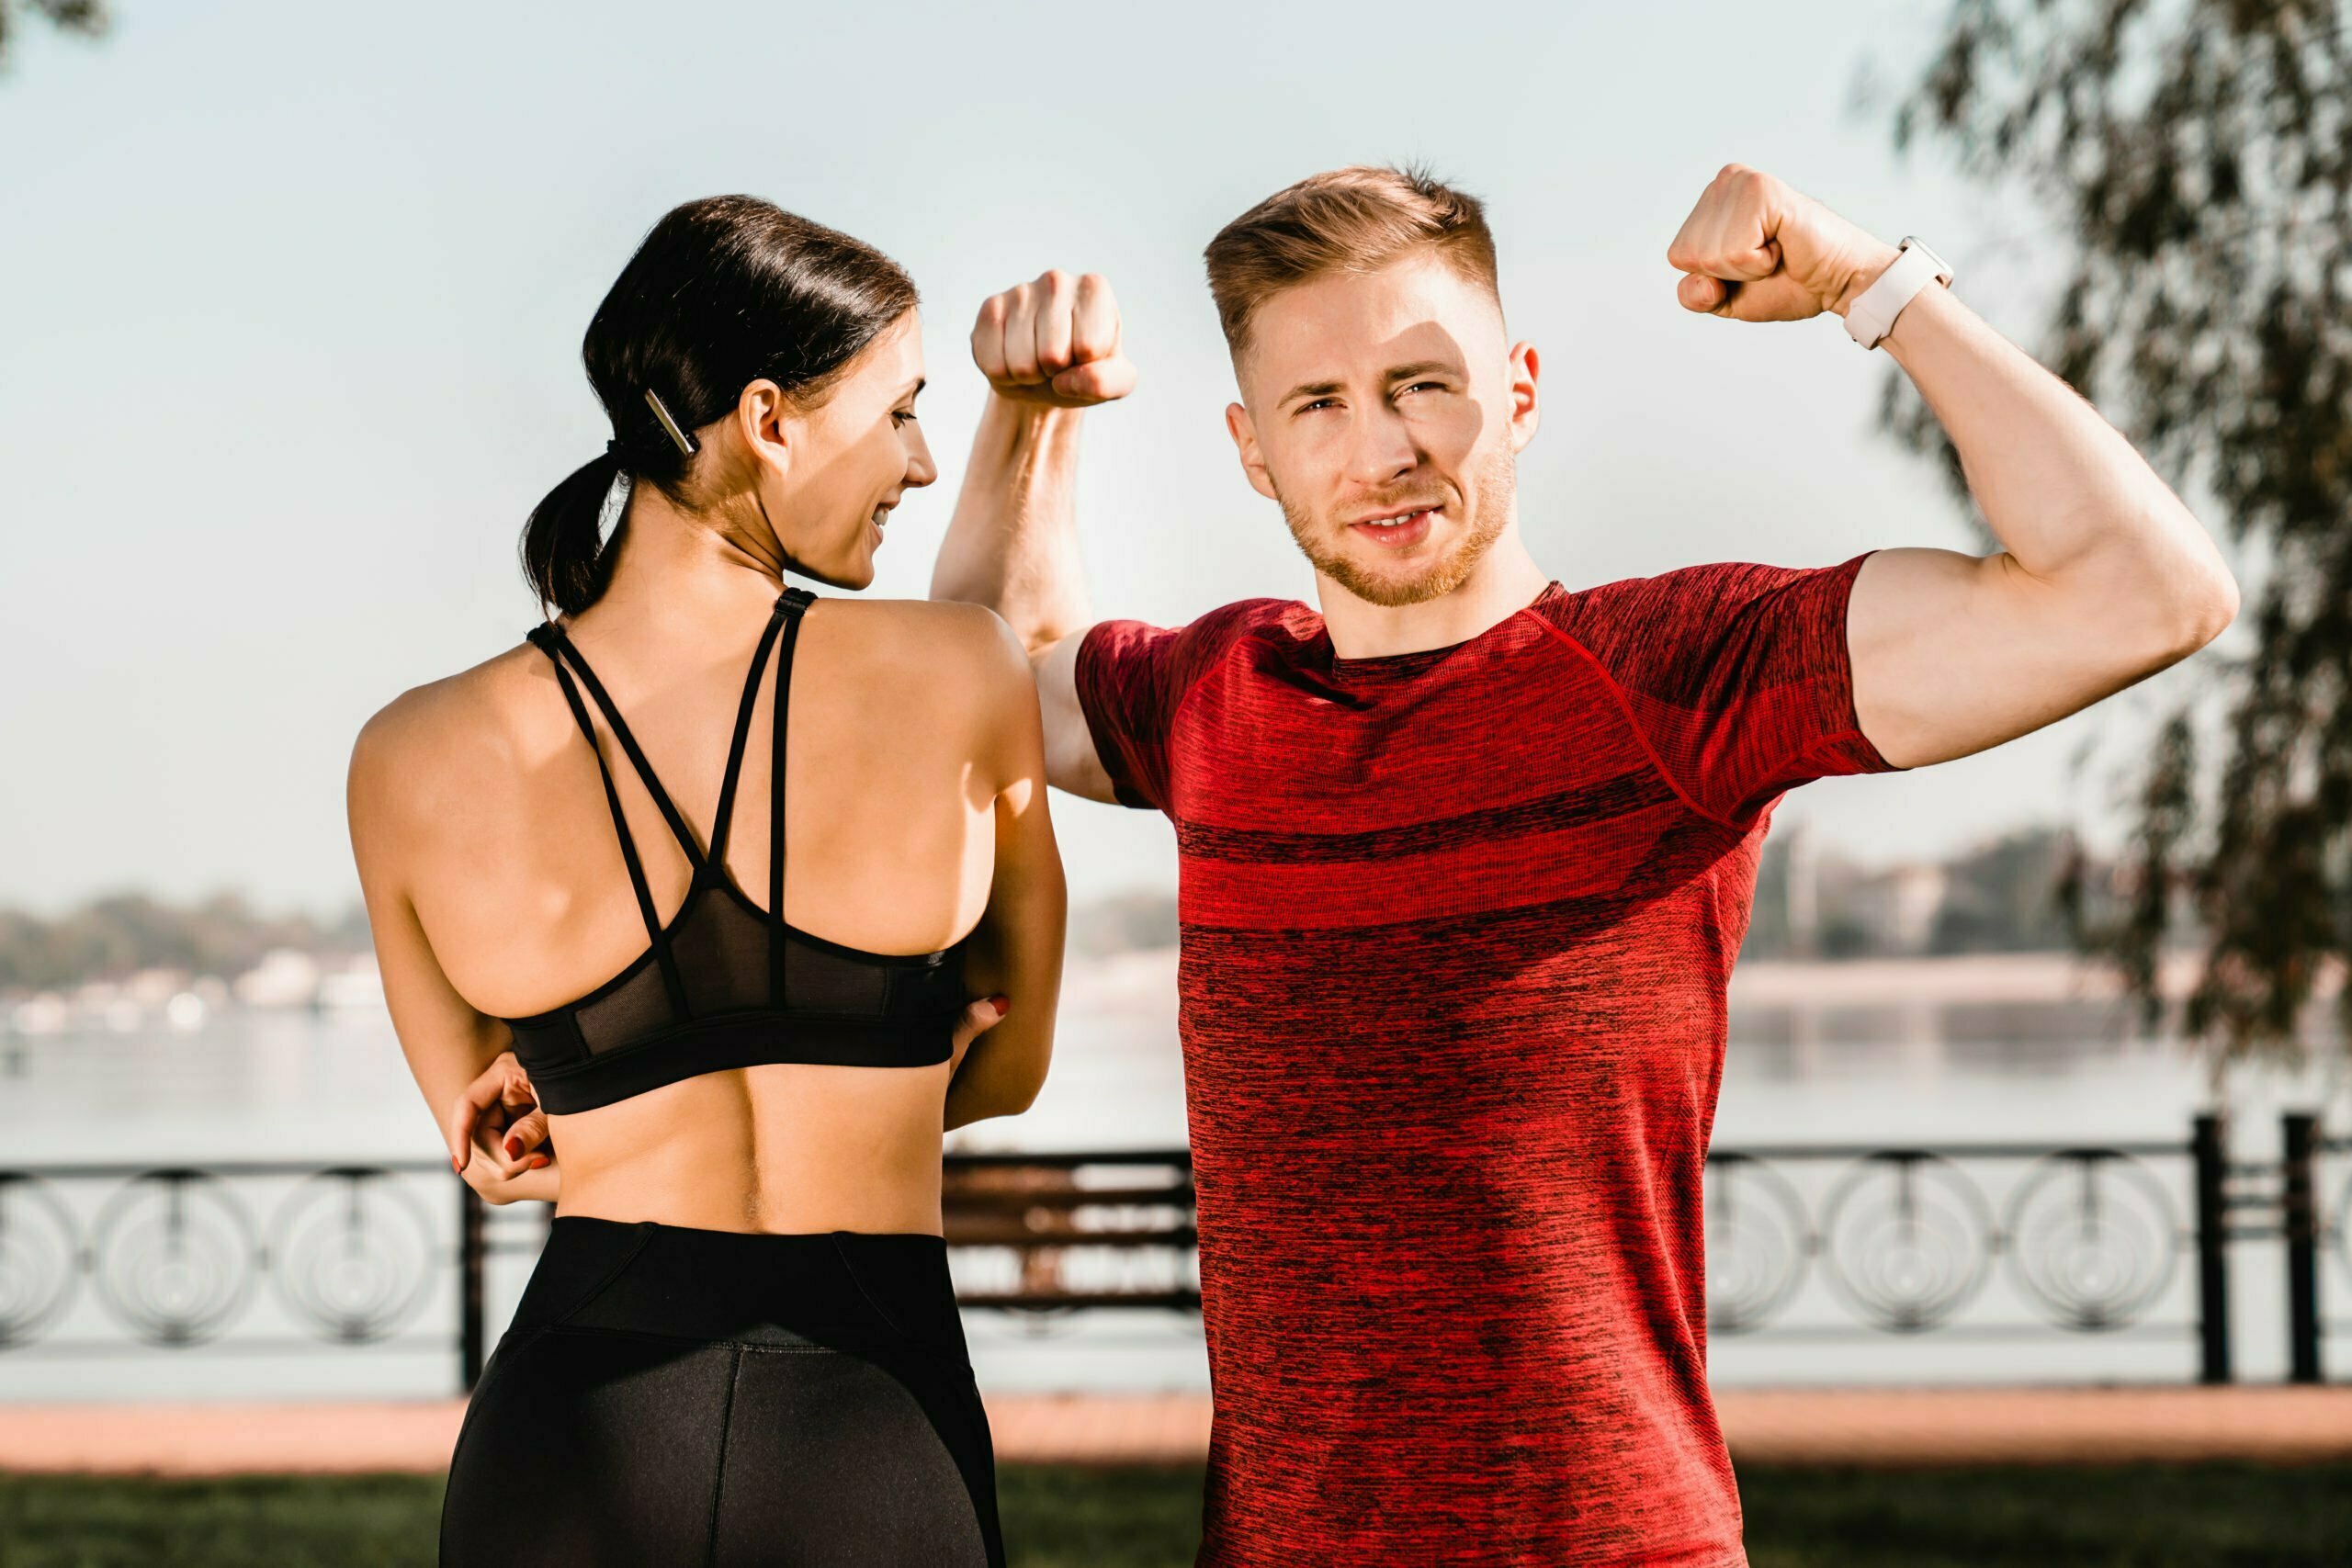 Strong fit young couple wearing fitness outfit in city park